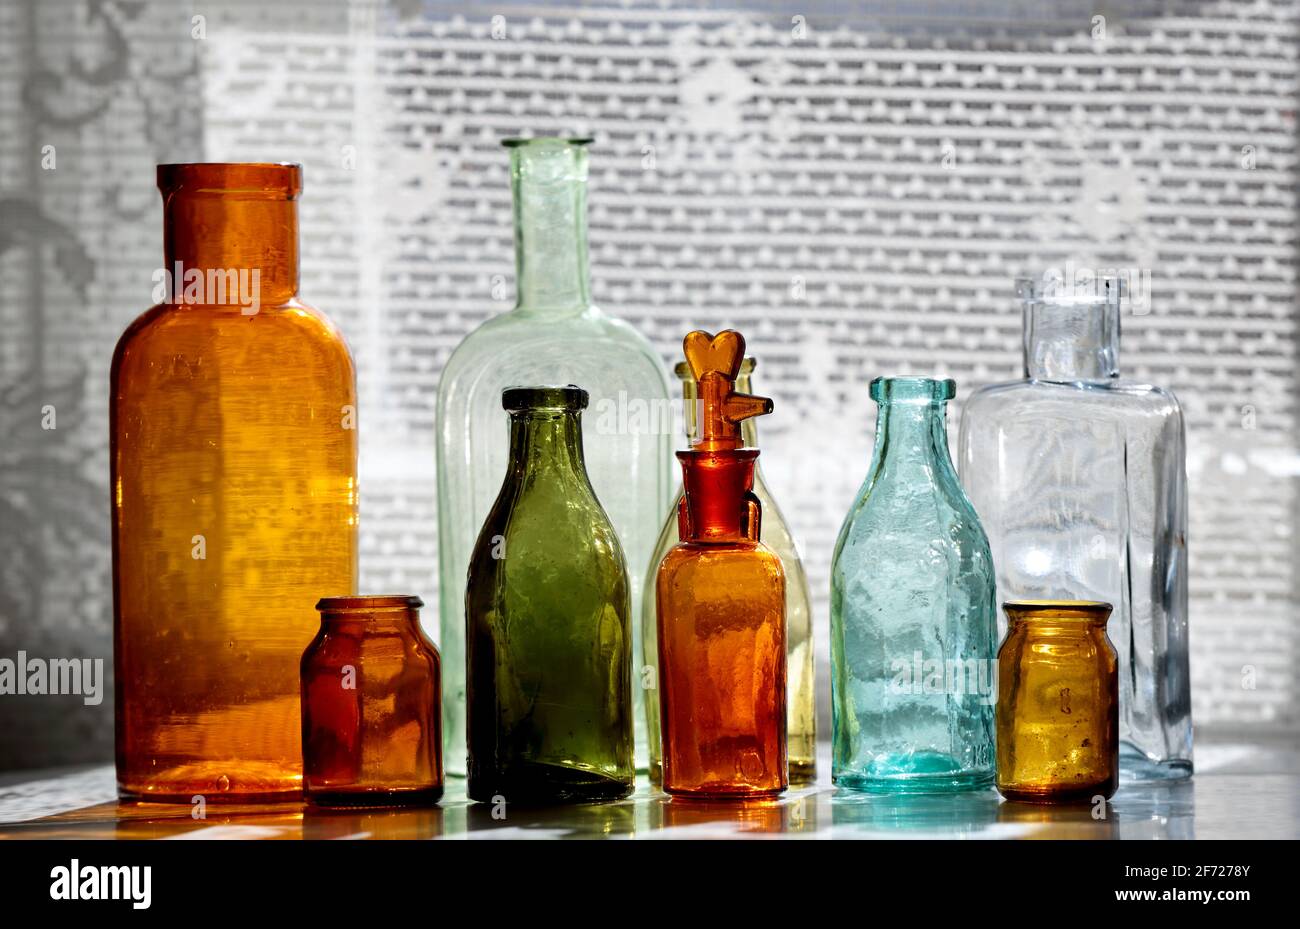 Antique glass bottles on a table next to a window Stock Photo